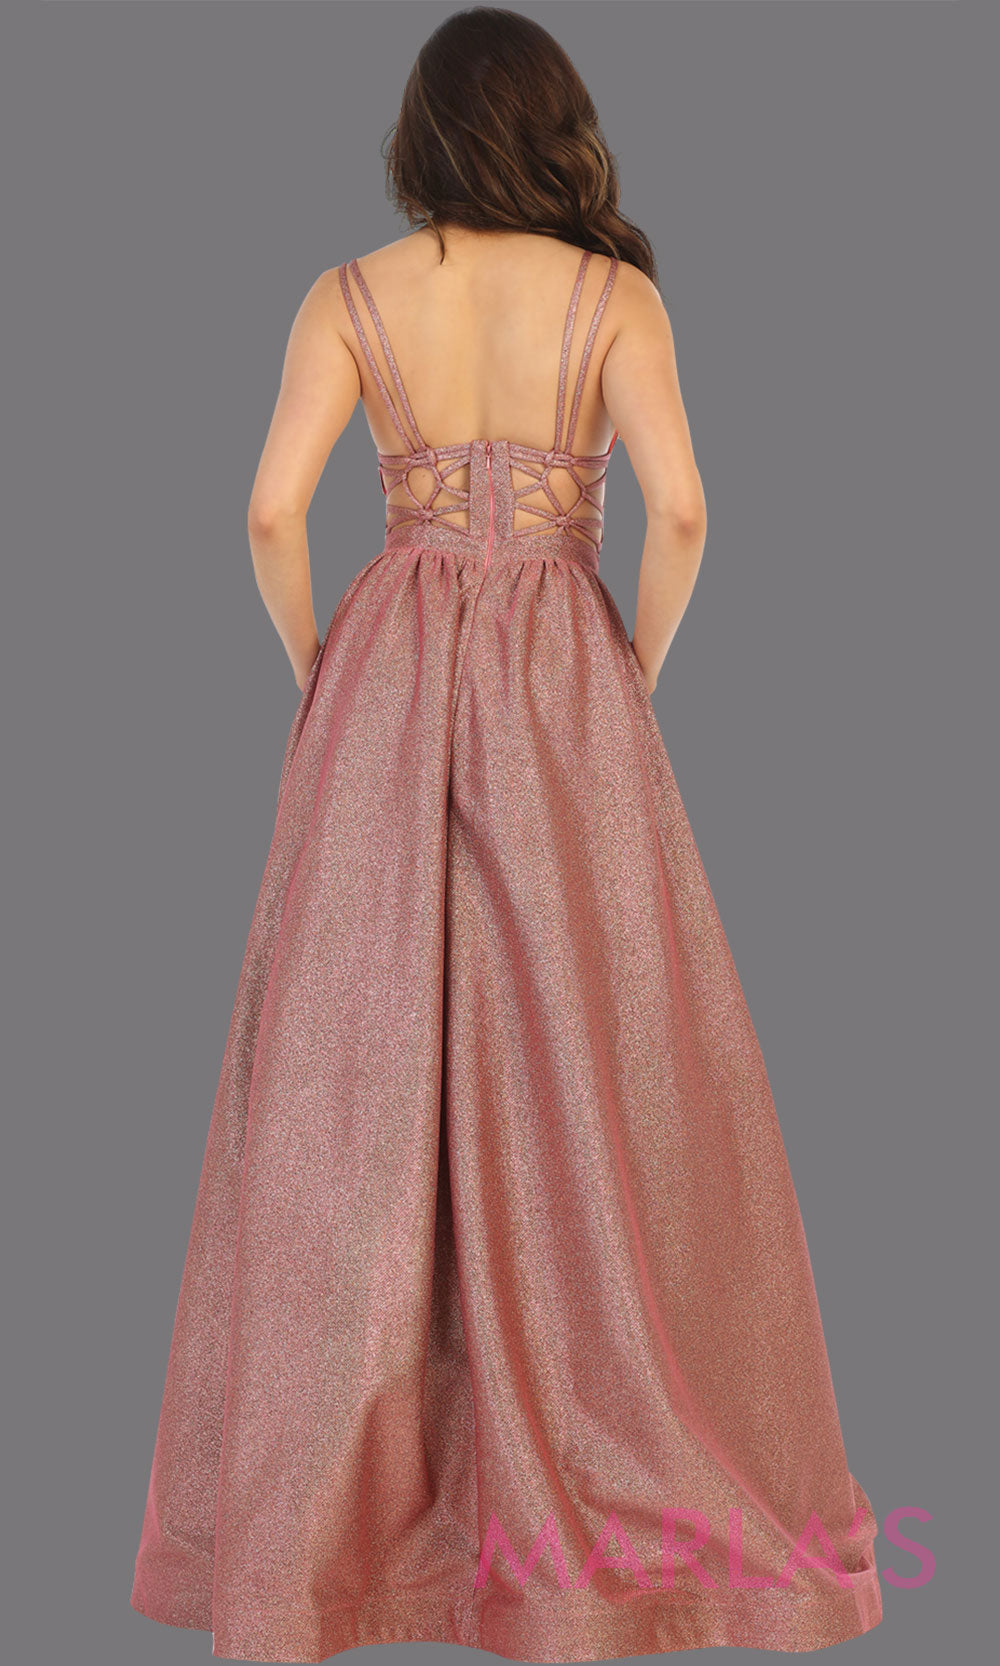 Back of Long coral v neck flowy open back dress from MayQueen RQ7748. This coral metallic gown is perfect for prom, engagement party dress, engagement shoot, e shoot, sweeet 16, sweet 15, plus size formal party dress.